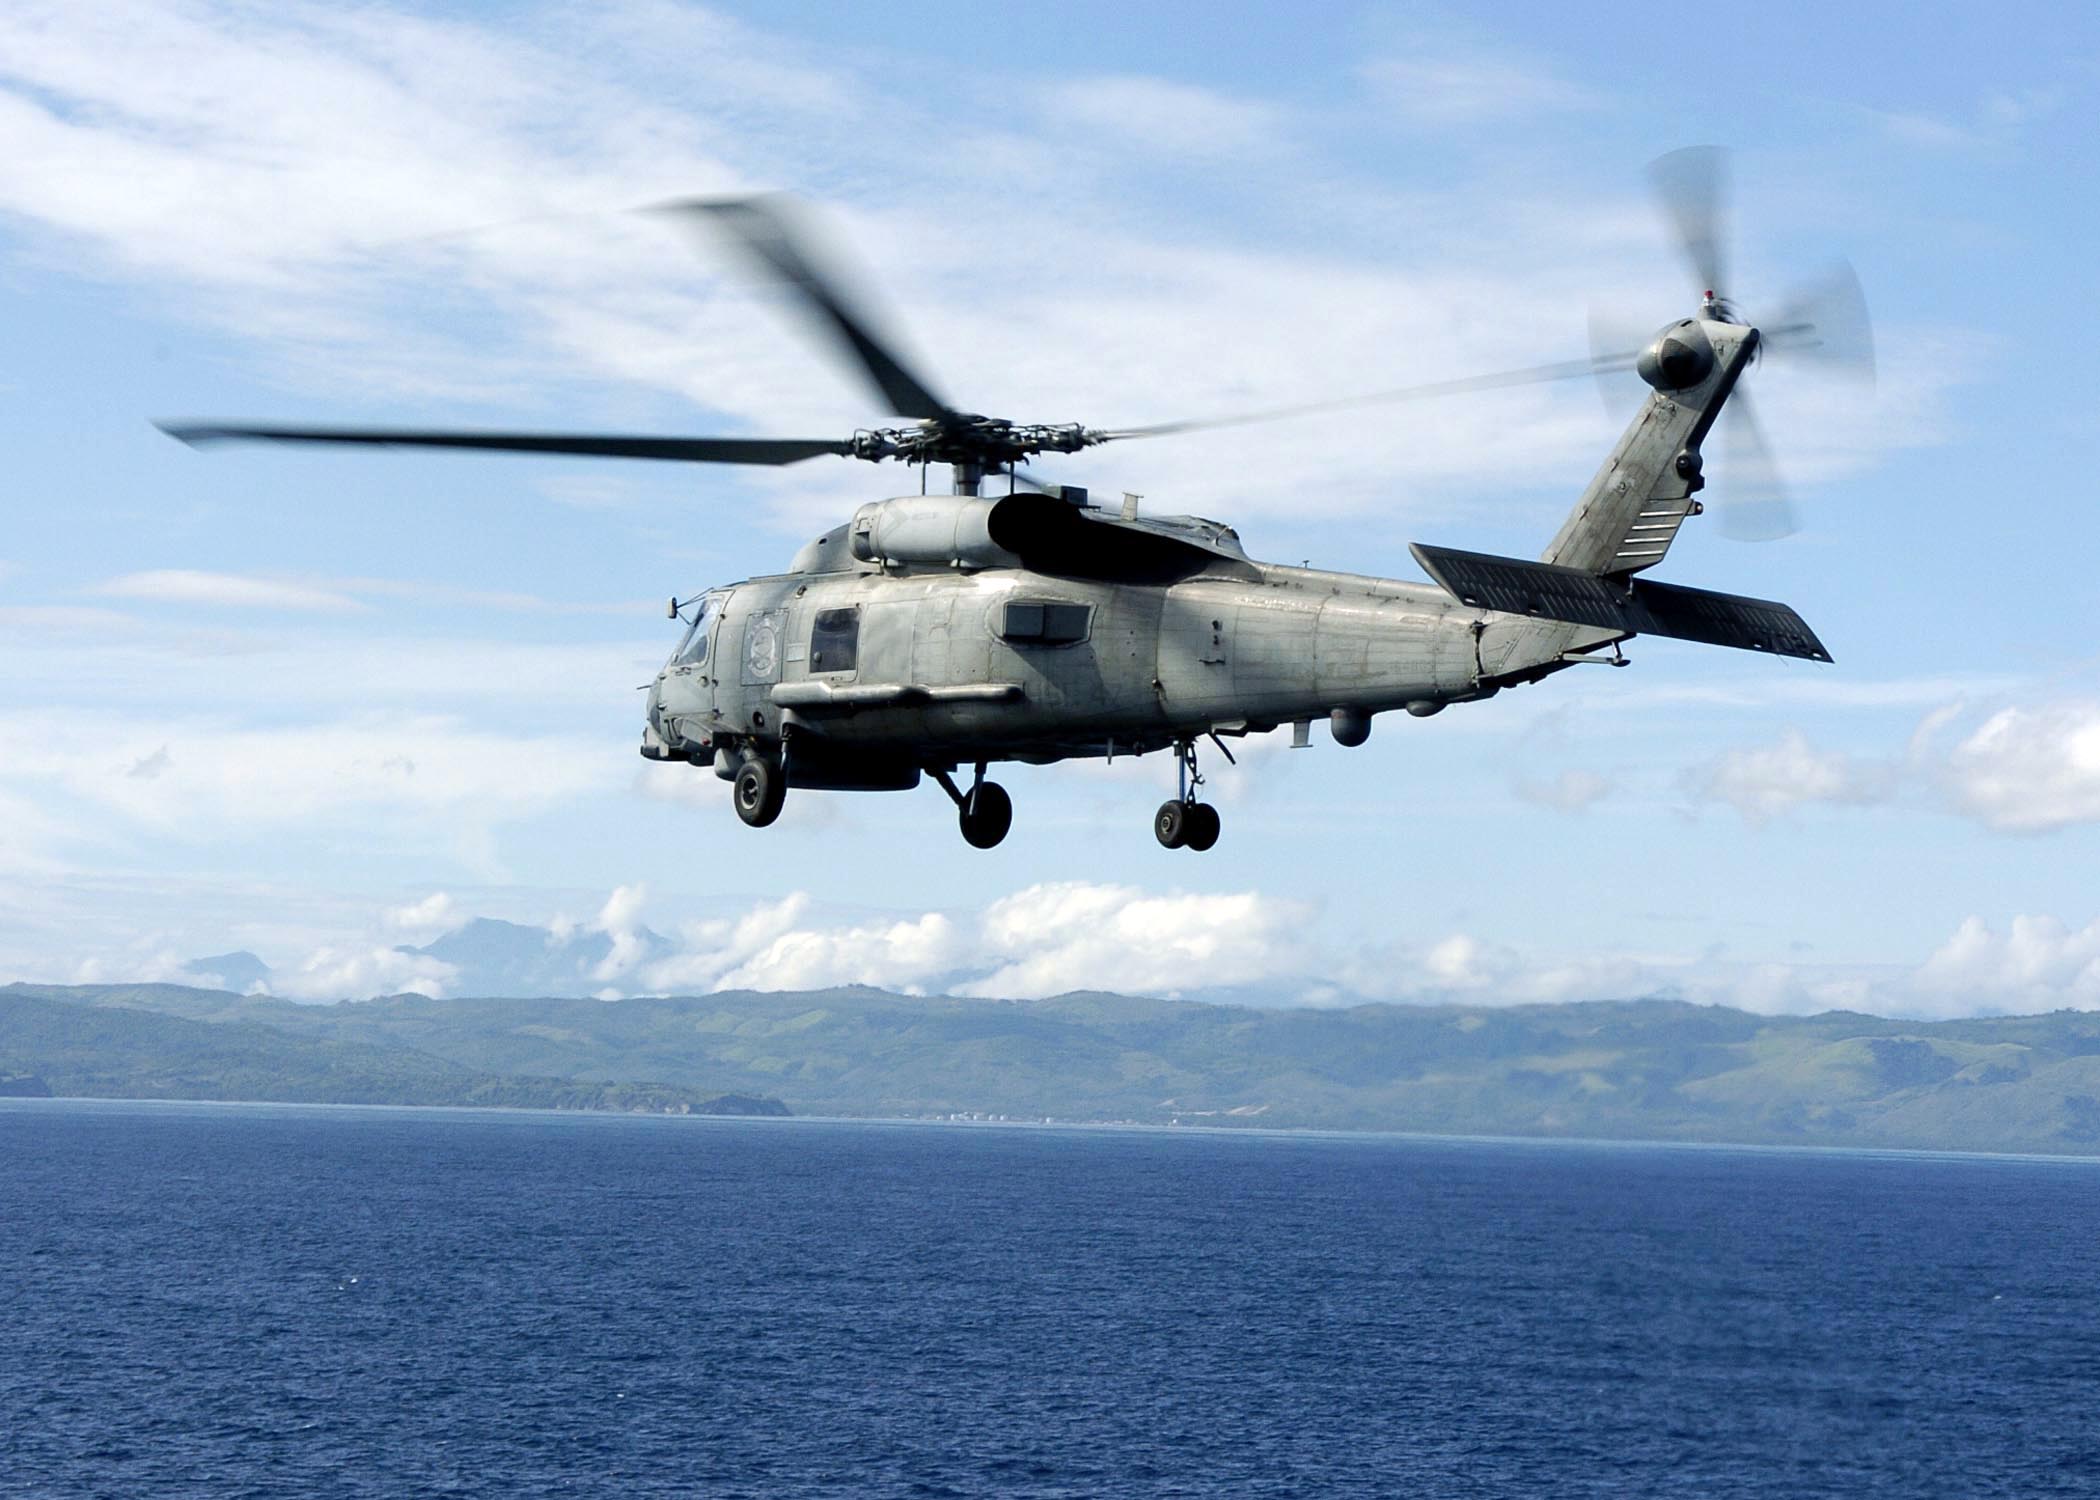 US Navy 050111-N-6817C-051 An SH-60B Seahawk takes off from the flight deck aboard USS Abraham Lincoln (CVN 72) toward the island of Sumatra, Indonesia